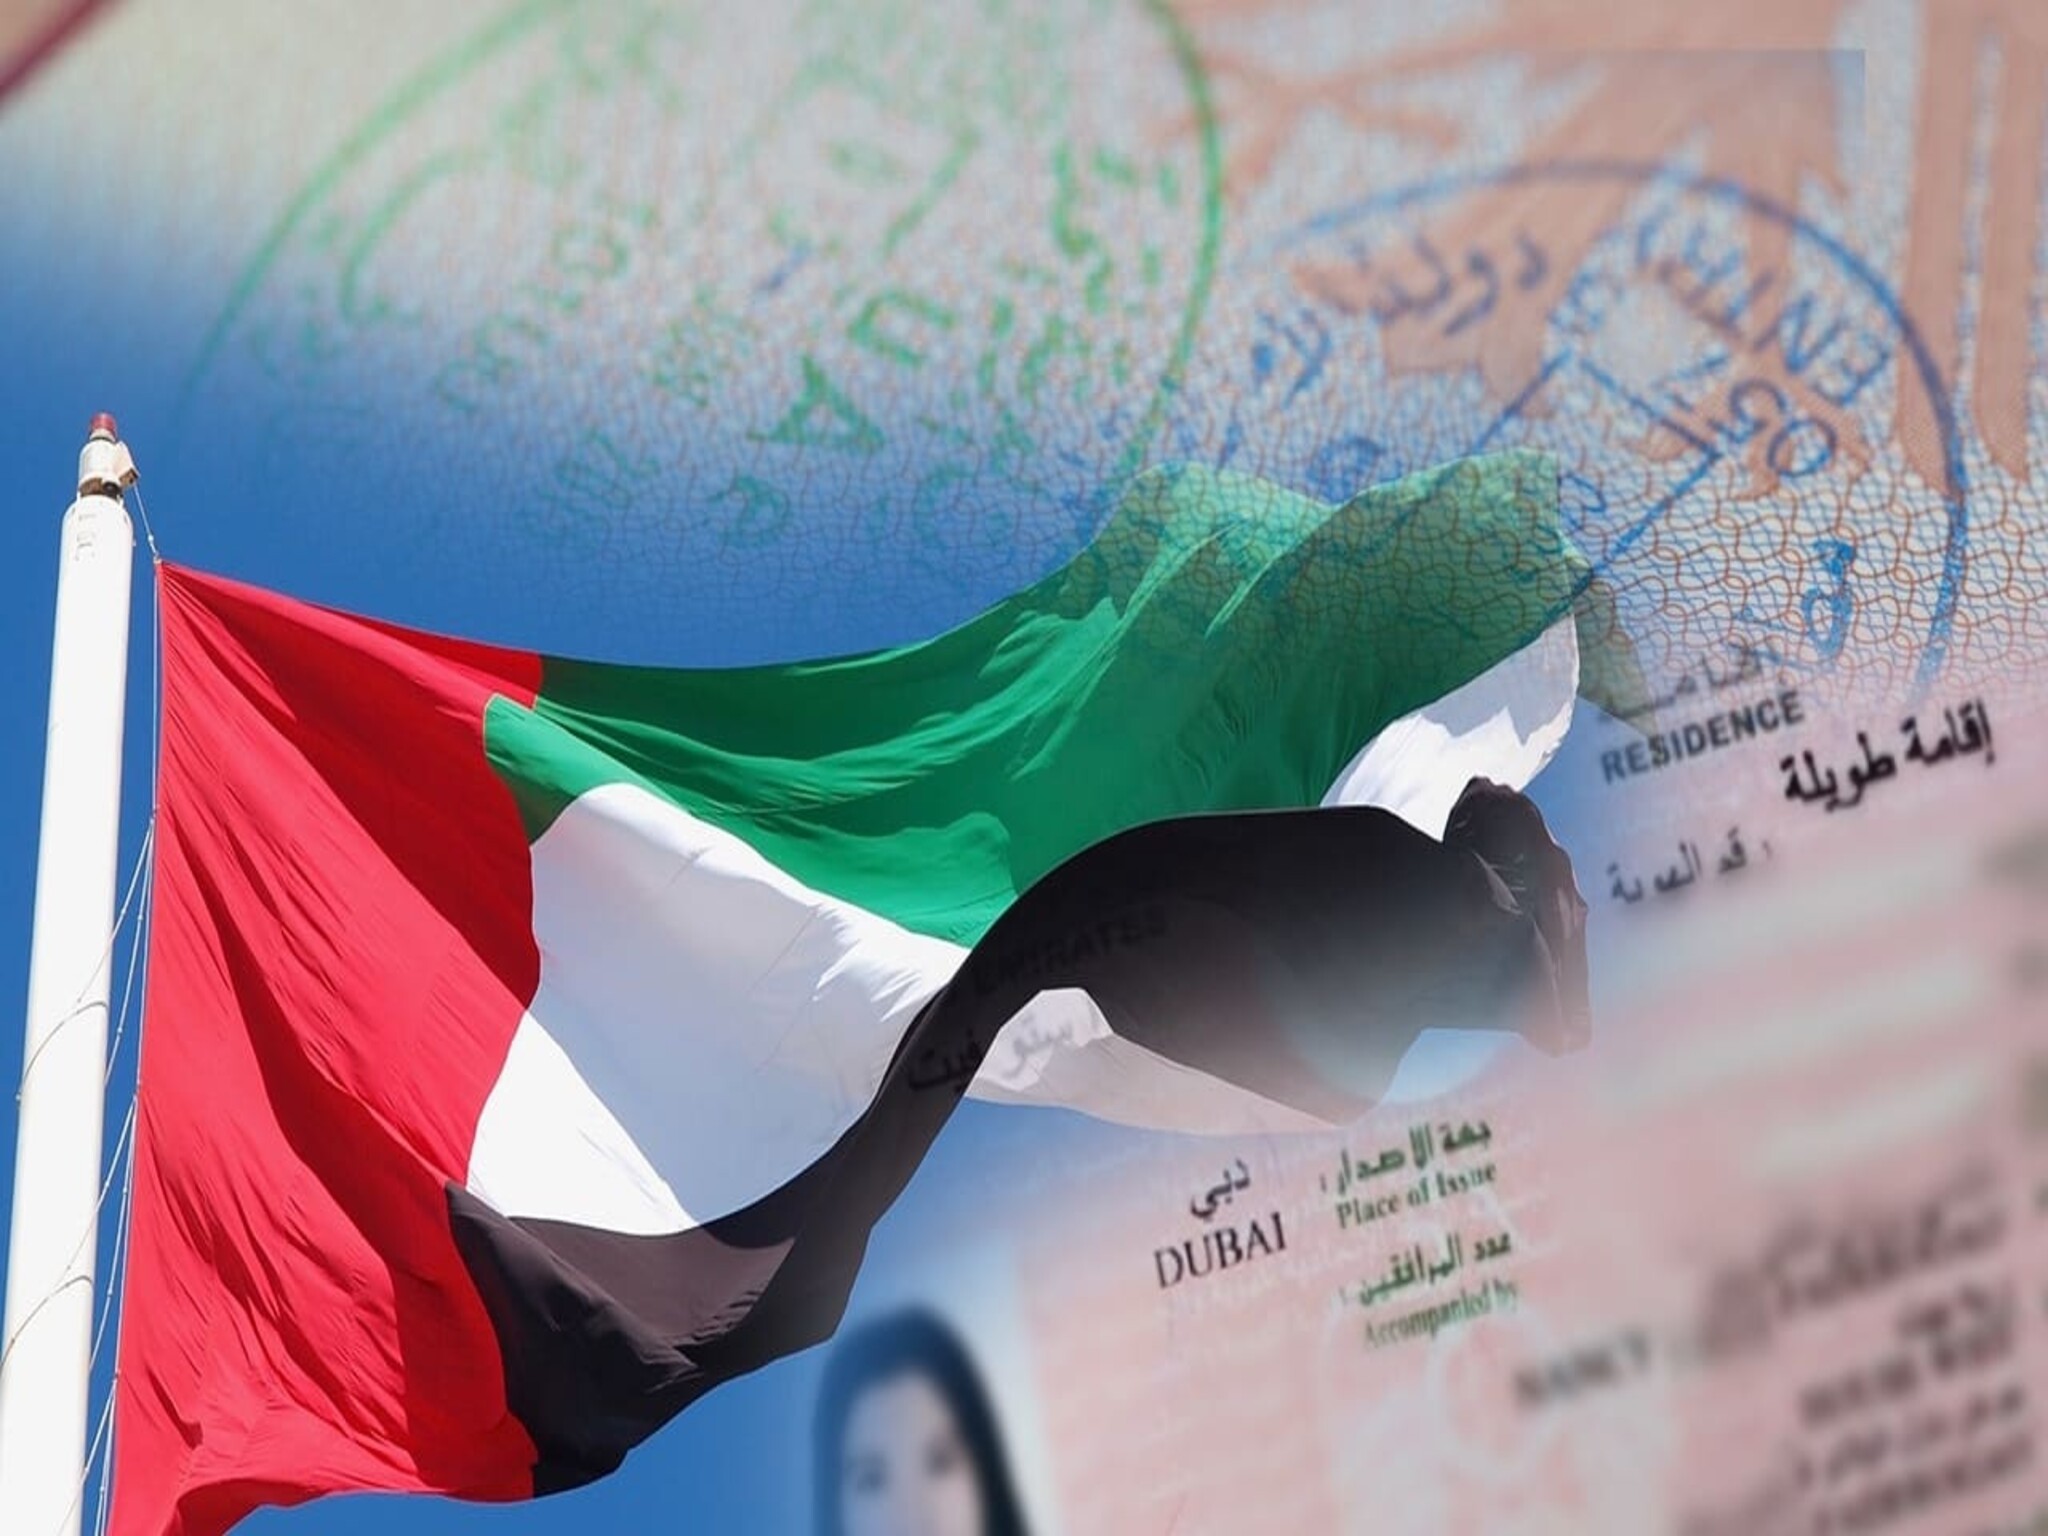 The UAE provides various visas for studies lasting from 5 to 10 years